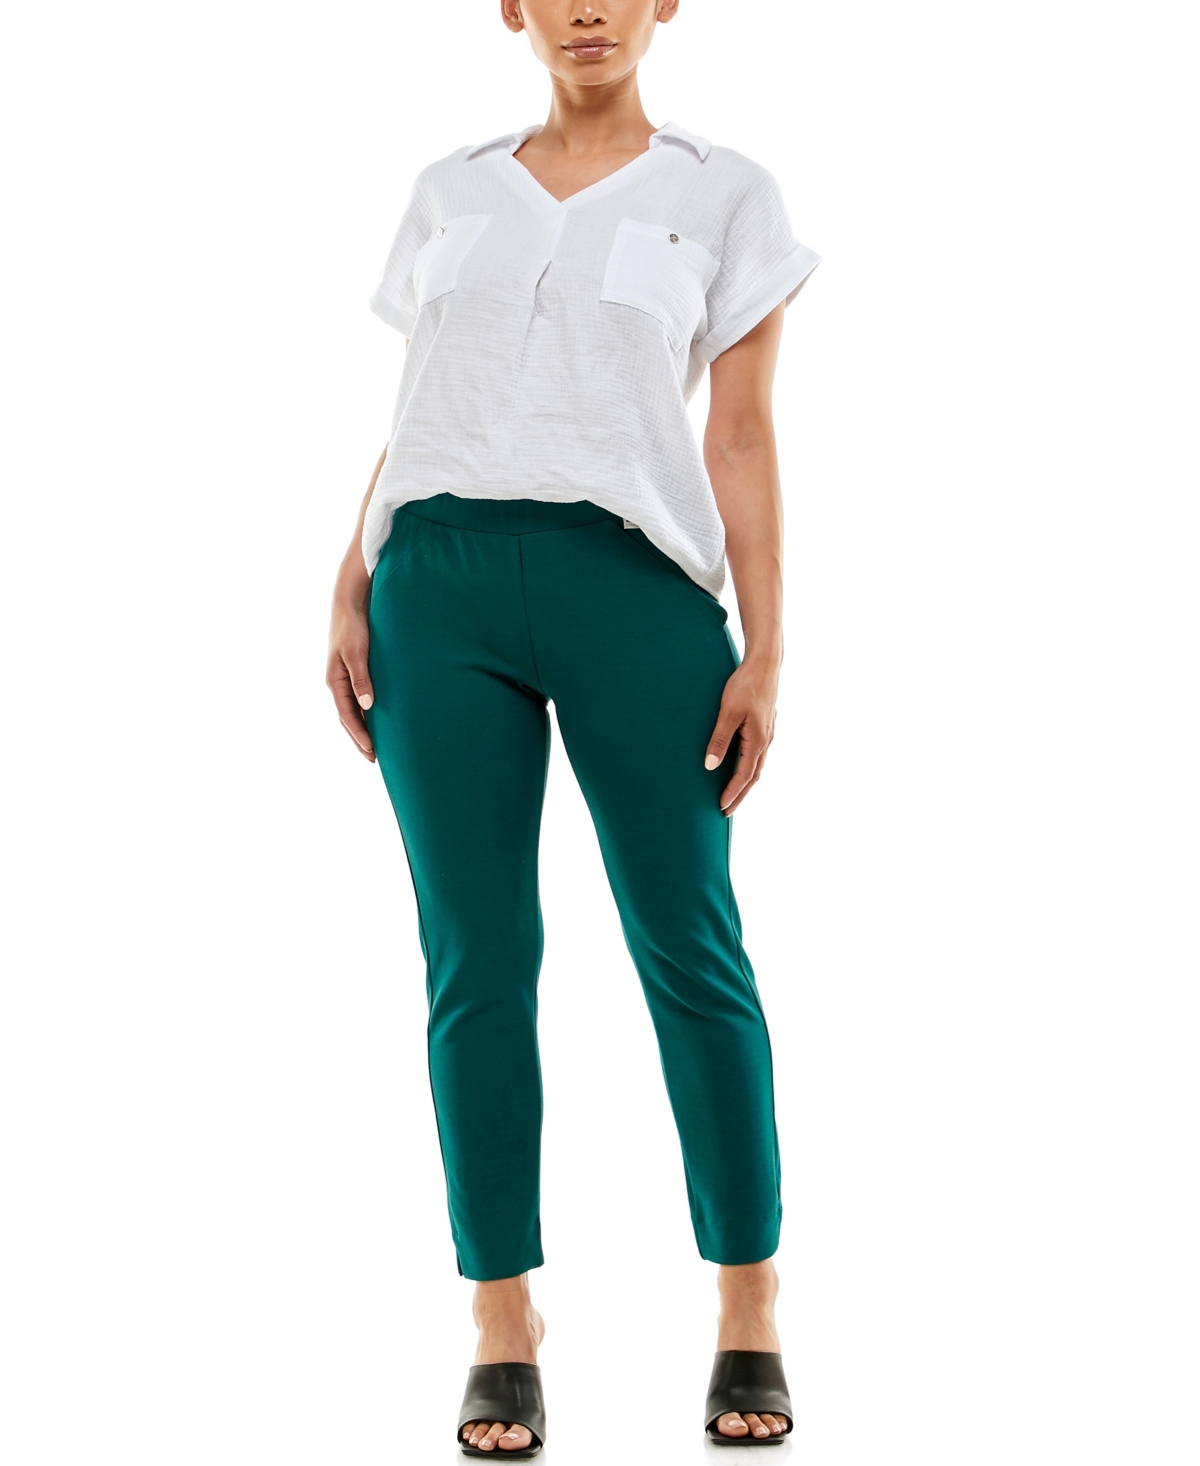 Women's Pull on Pants with Side Slits - Storm